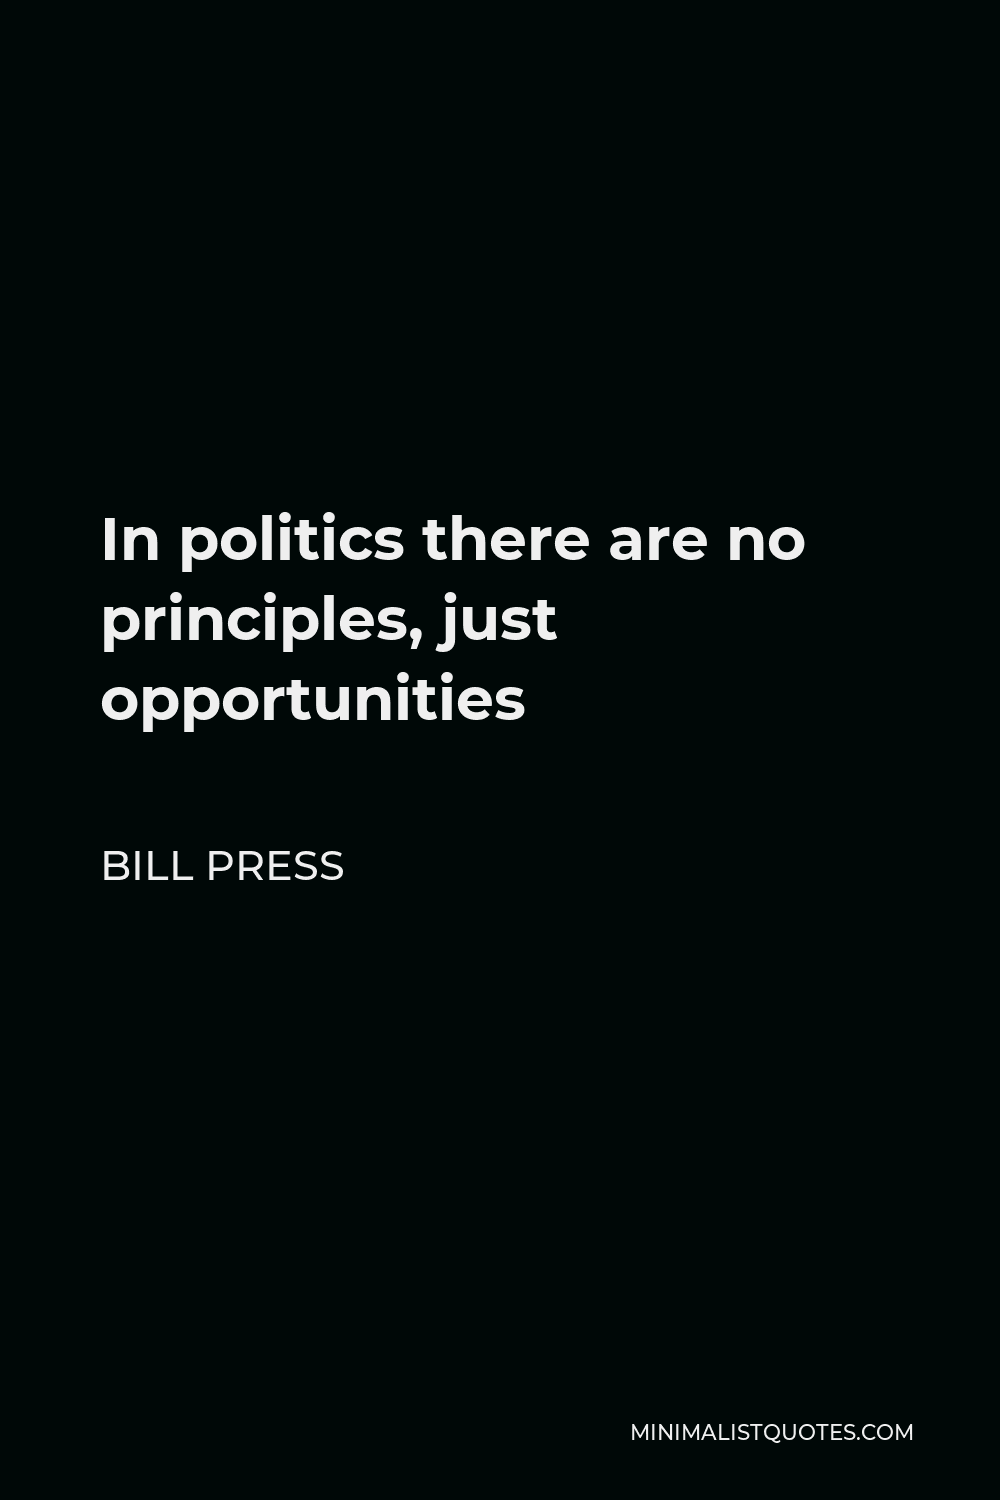 Bill Press Quote - In politics there are no principles, just opportunities